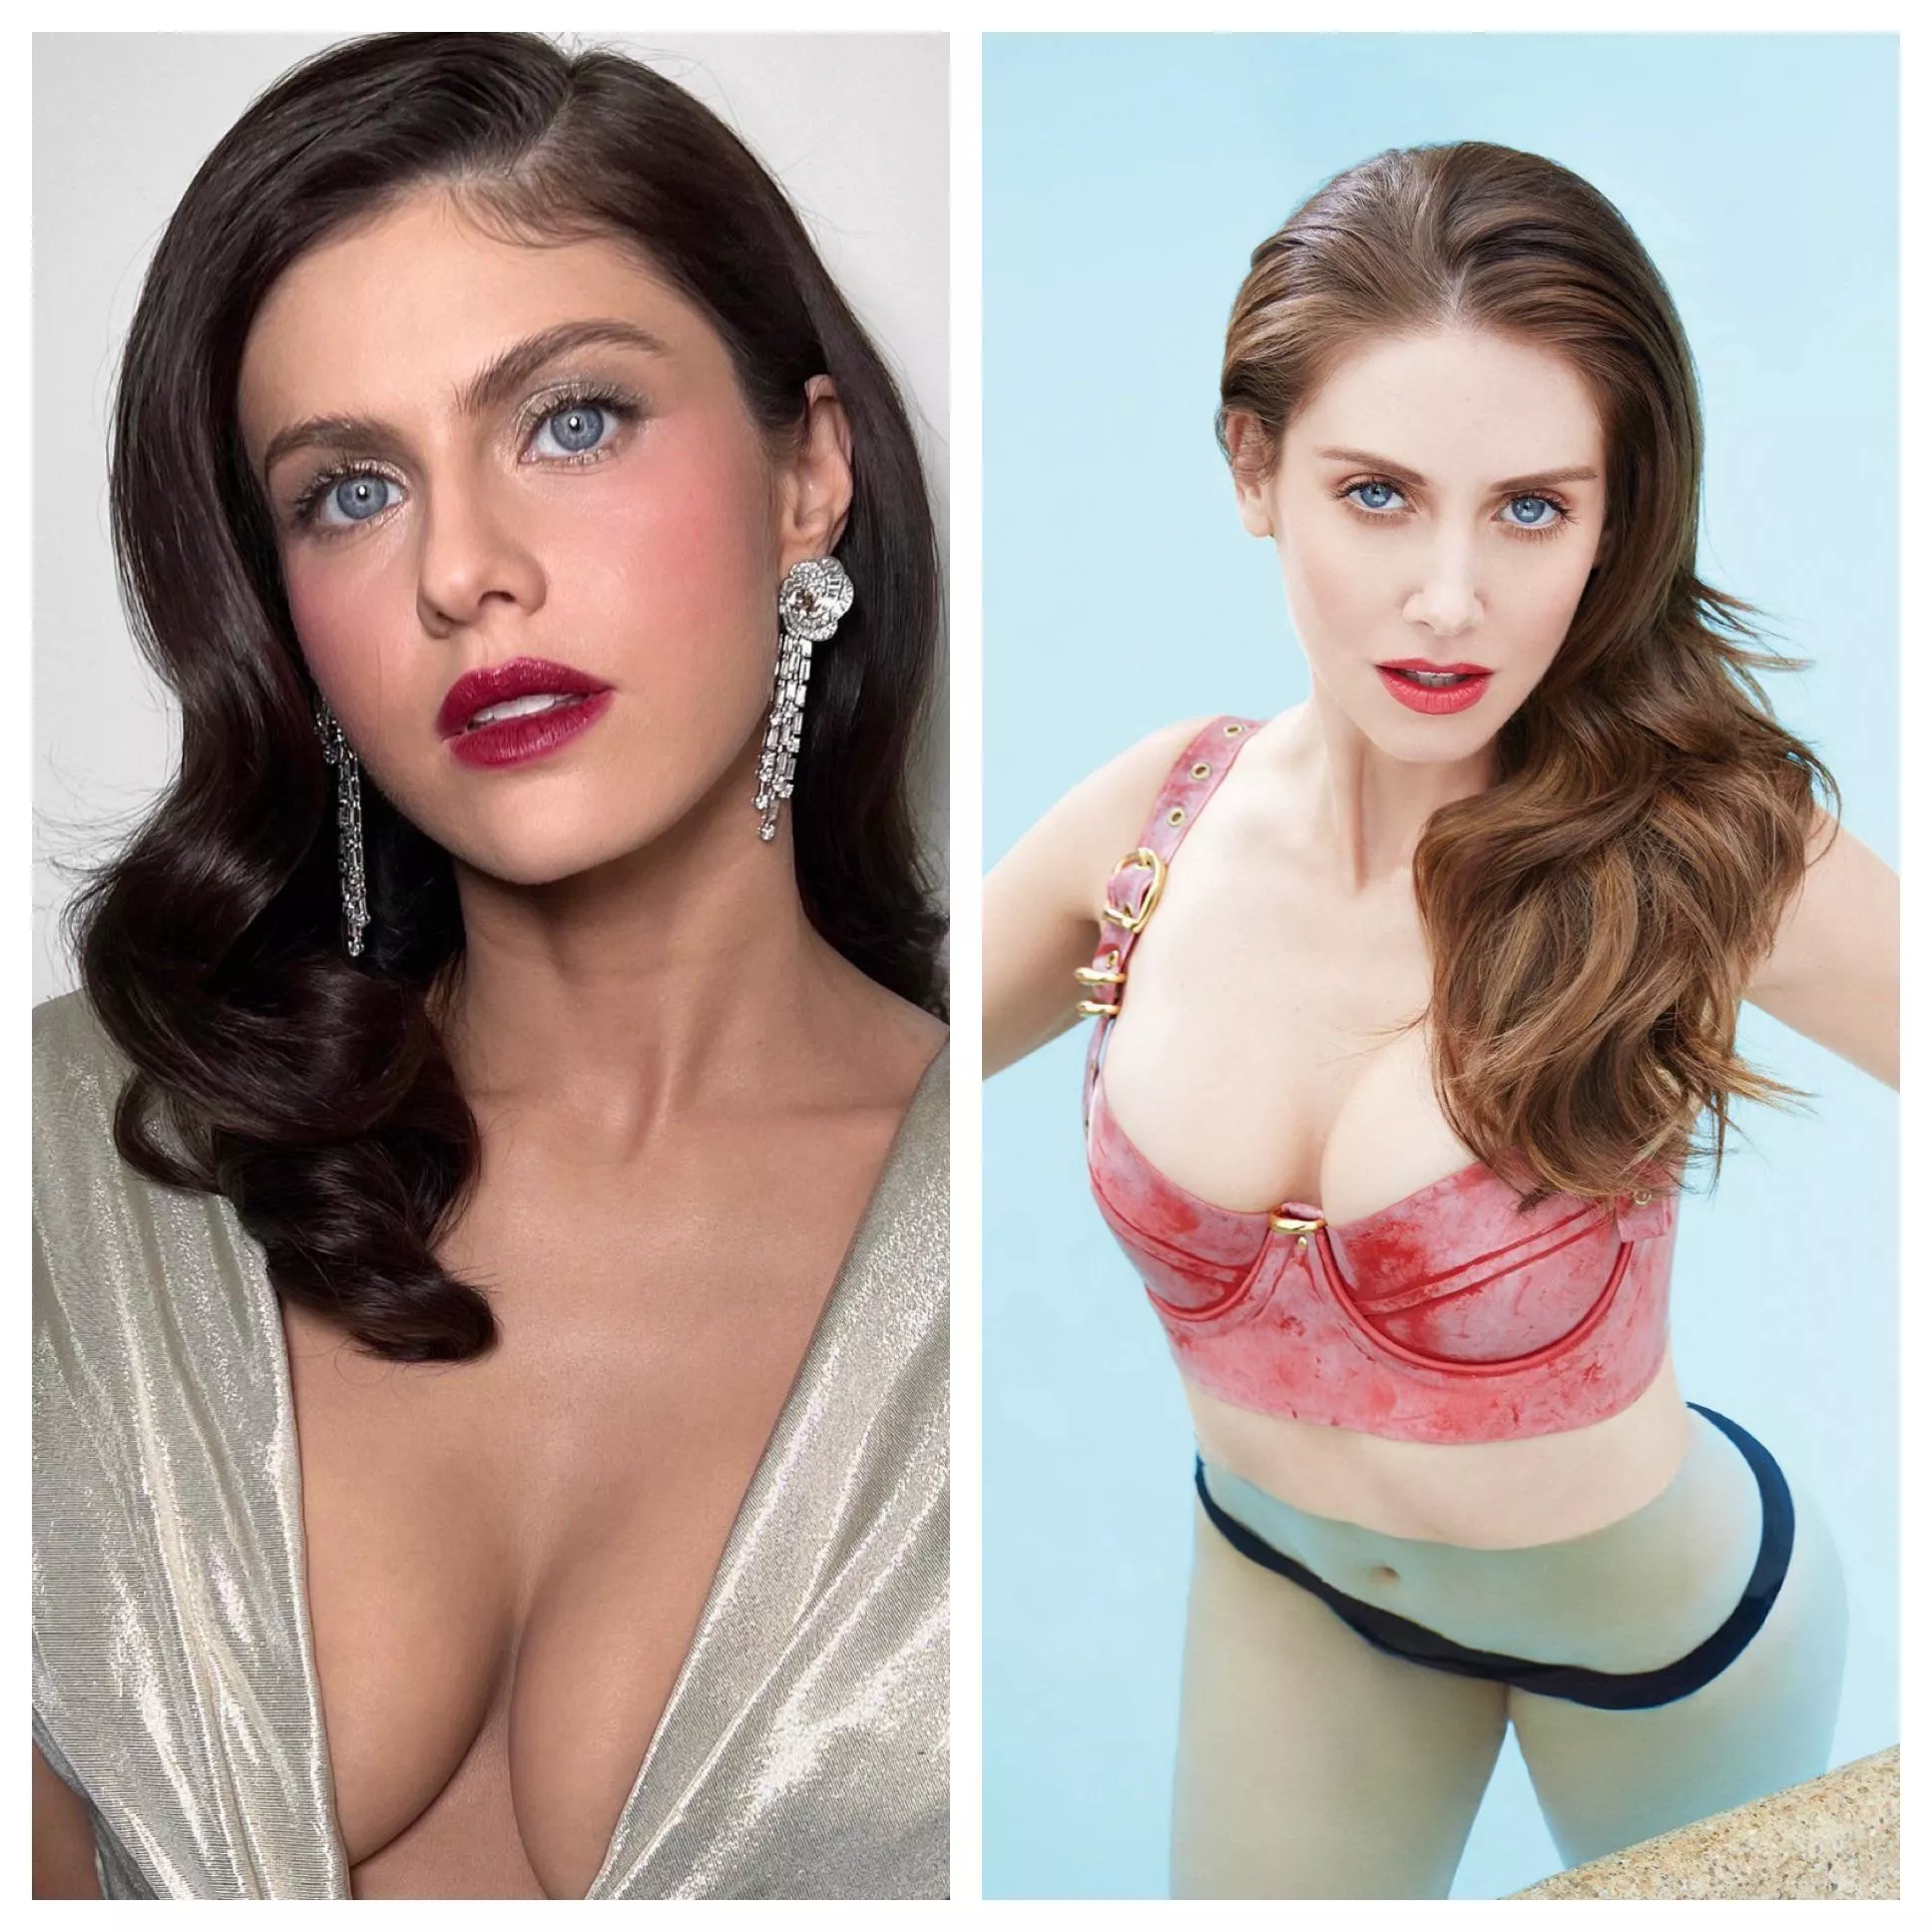 Tit Goddesses - Drain me and goon me out to big tit goddesses like Alexandra Daddario and  Alison Brie nudes by HeavyKreme